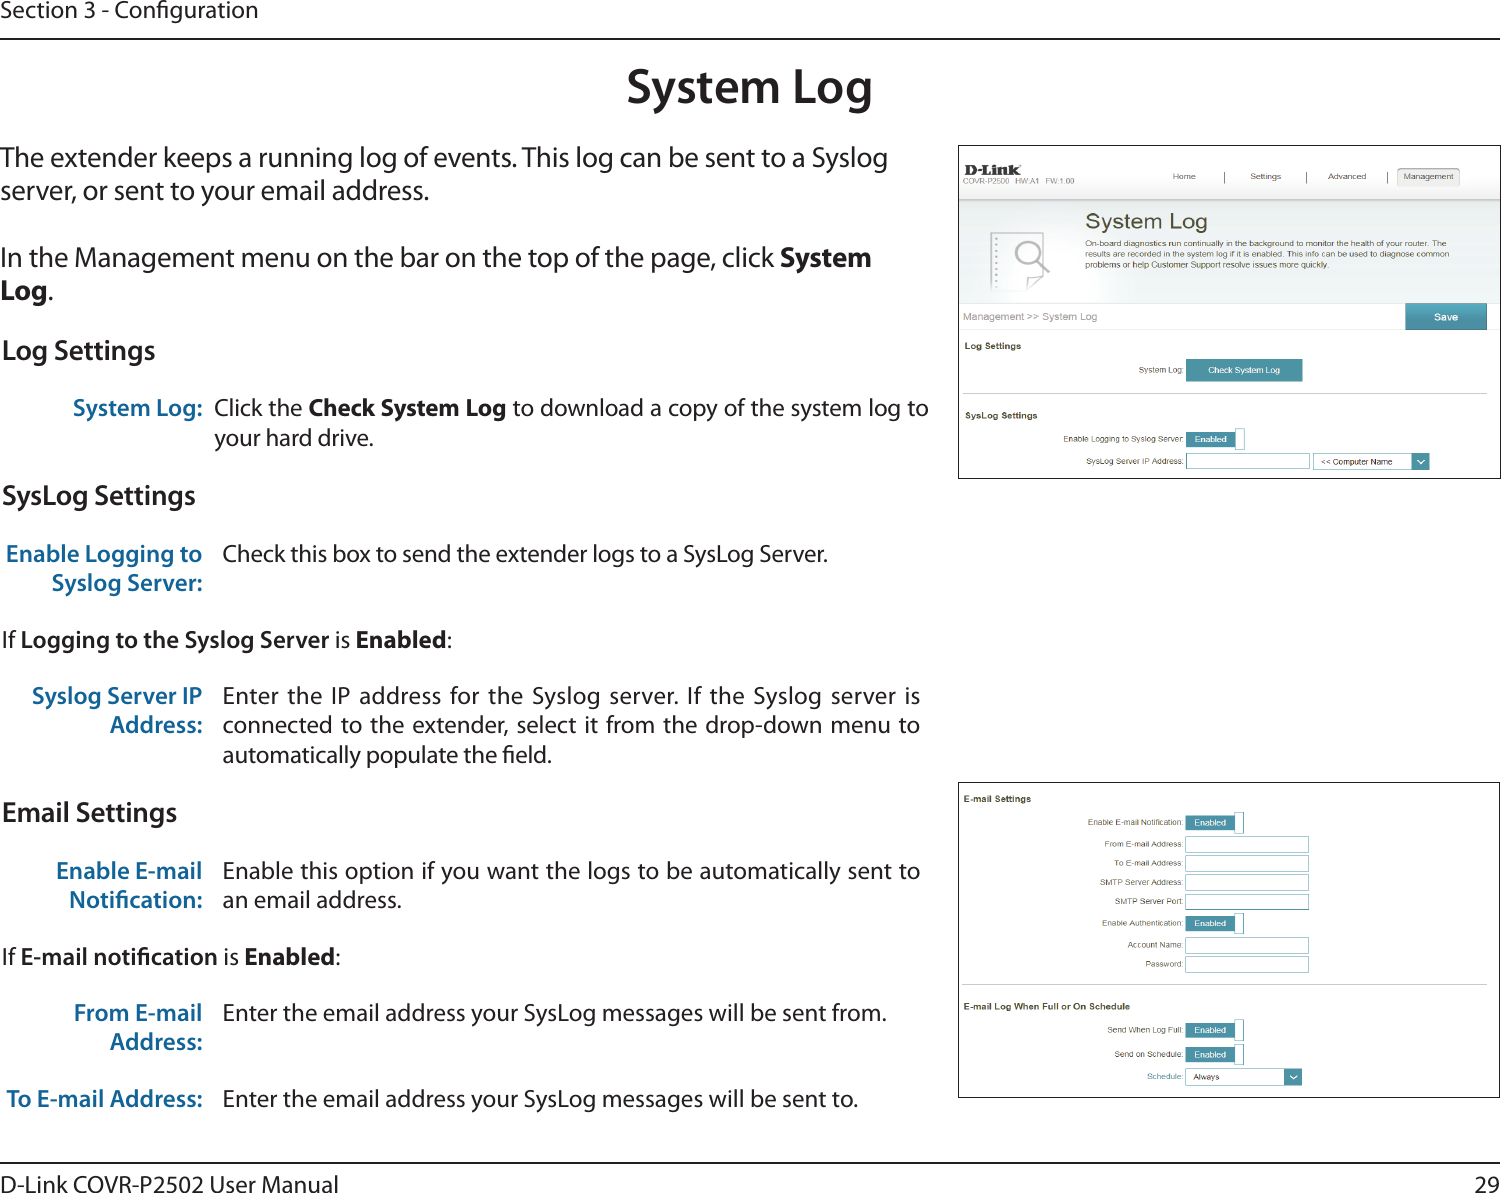 29D-Link COVR-P2502 User ManualSection 3 - CongurationSystem LogThe extender keeps a running log of events. This log can be sent to a Syslog server, or sent to your email address. In the Management menu on the bar on the top of the page, click System Log. Log SettingsSystem Log: Click the Check System Log to download a copy of the system log to your hard drive.SysLog SettingsEnable Logging to Syslog Server:Check this box to send the extender logs to a SysLog Server. If Logging to the Syslog Server is Enabled:Syslog Server IP Address:Enter the IP address for the Syslog server. If the Syslog server is connected to the extender, select it from the drop-down menu to automatically populate the eld. Email SettingsEnable E-mail Notication:Enable this option if you want the logs to be automatically sent to an email address.If E-mail notication is Enabled:From E-mail Address:Enter the email address your SysLog messages will be sent from.To E-mail Address: Enter the email address your SysLog messages will be sent to.